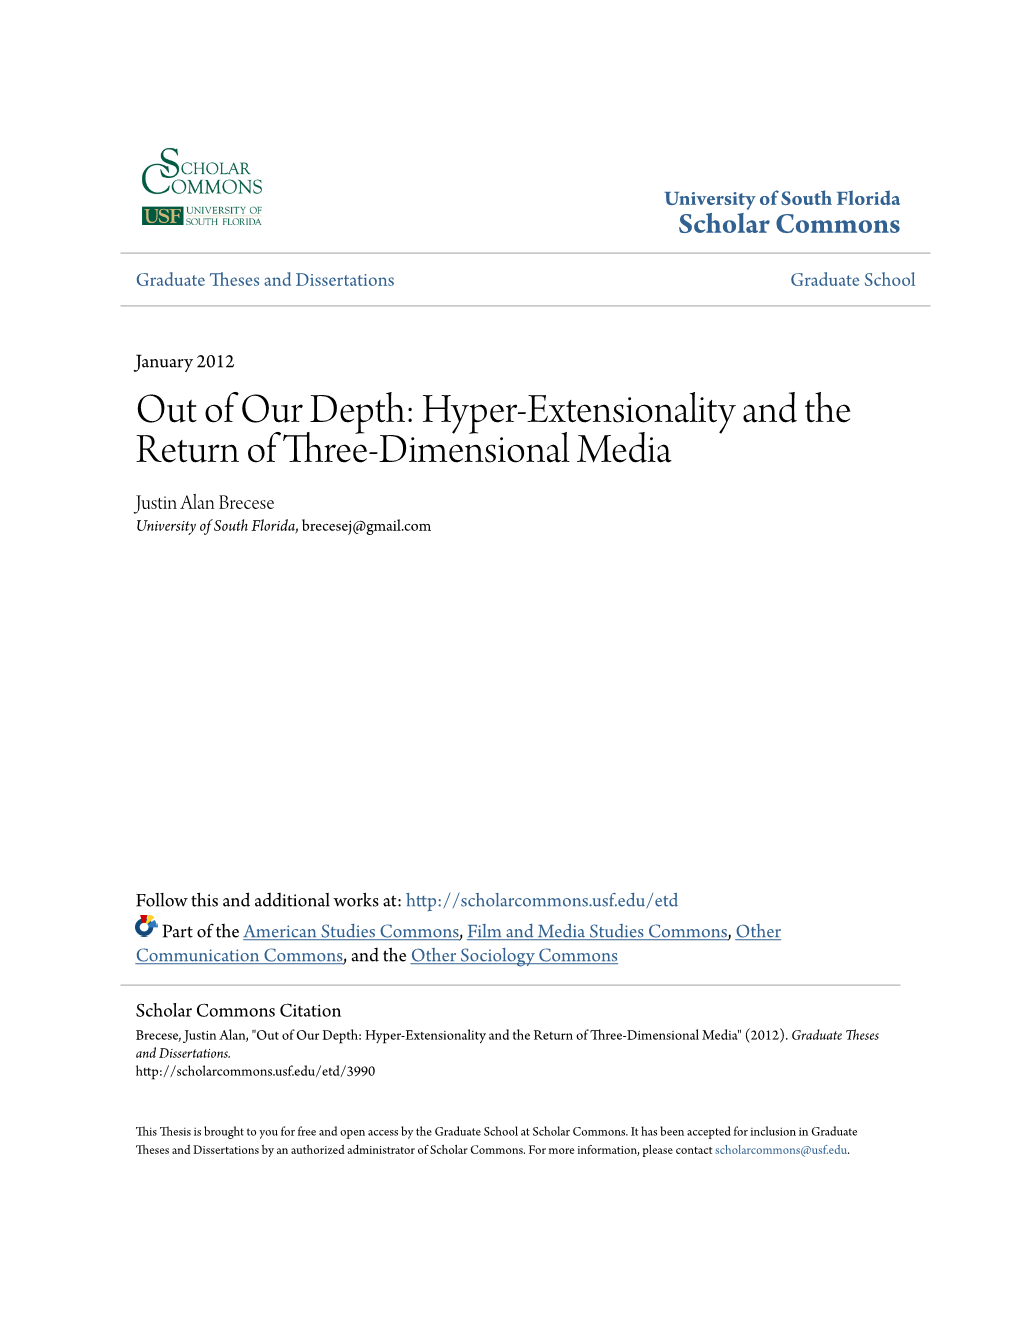 Hyper-Extensionality and the Return of Three-Dimensional Media Justin Alan Brecese University of South Florida, Brecesej@Gmail.Com